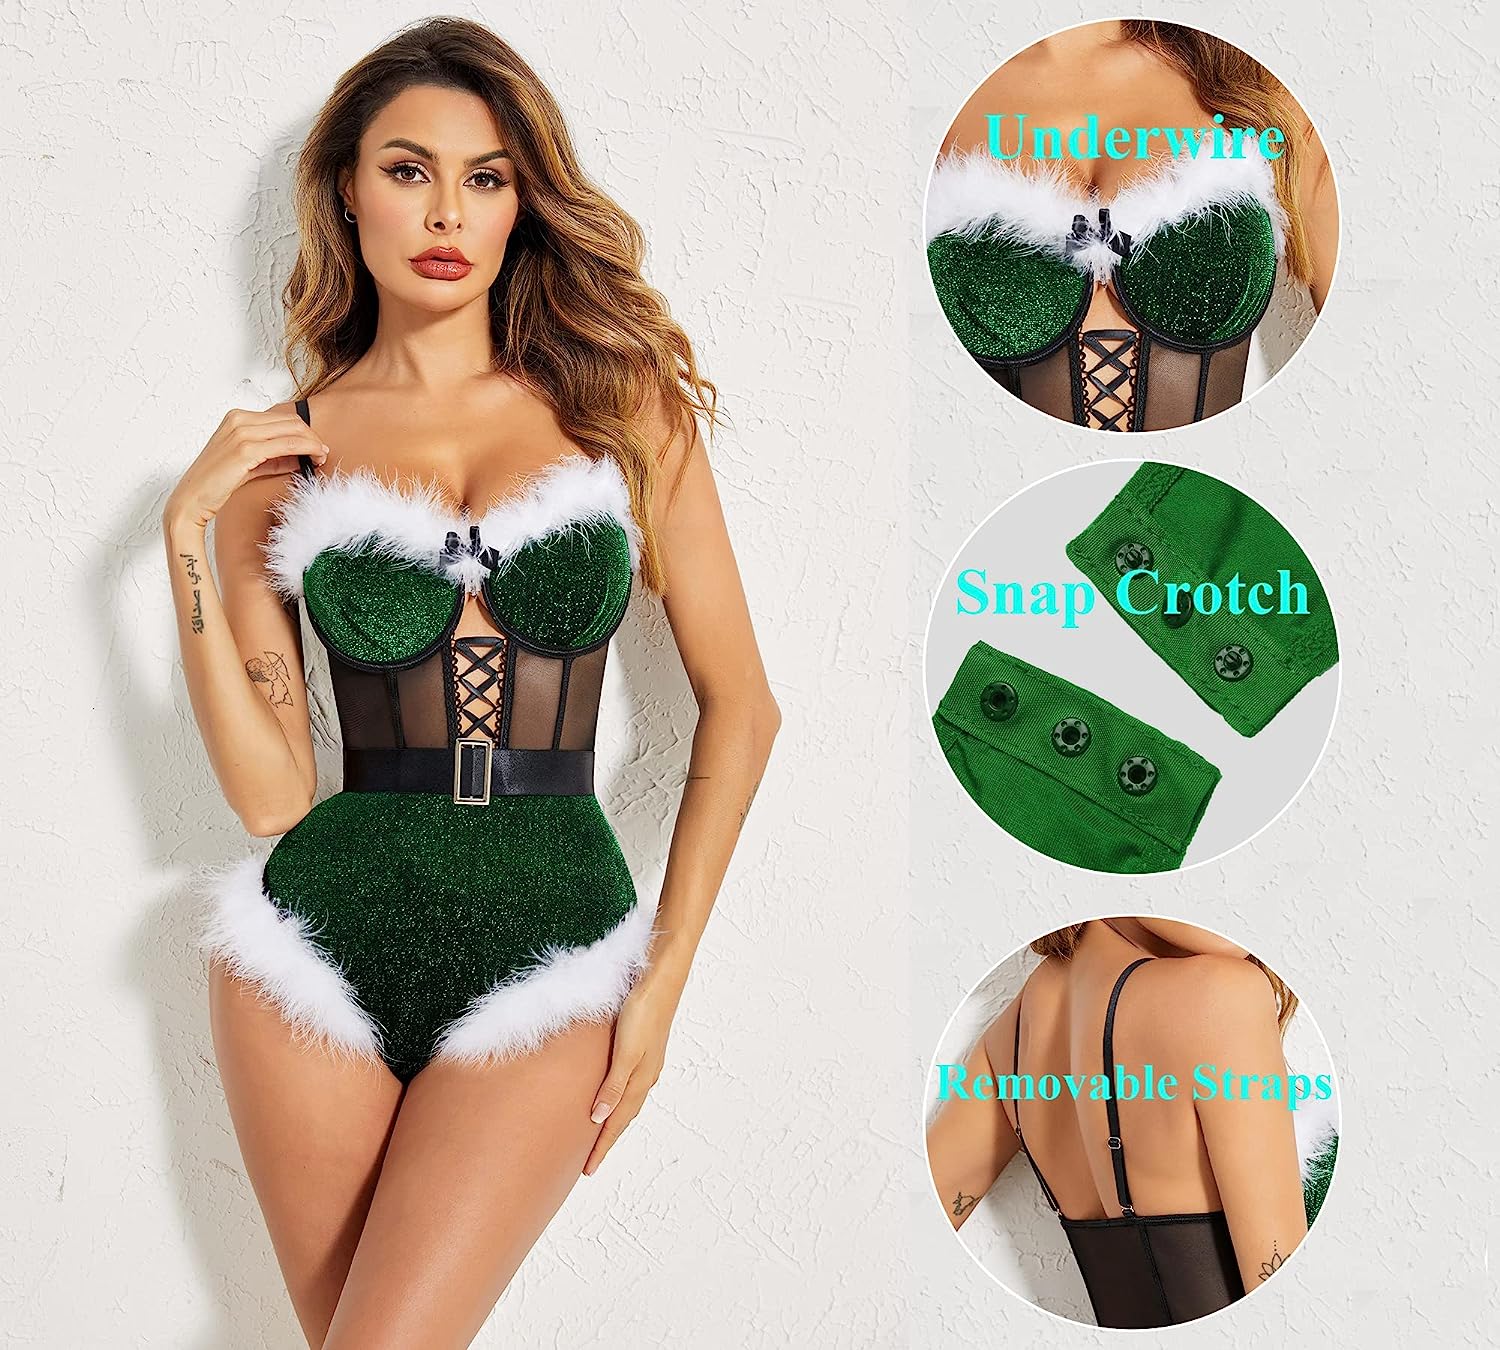 Avidlove Lingerie For Snap Crotch Bodysuit Santa Costumes Deep V Boudior Outfits With Underwire and Belt